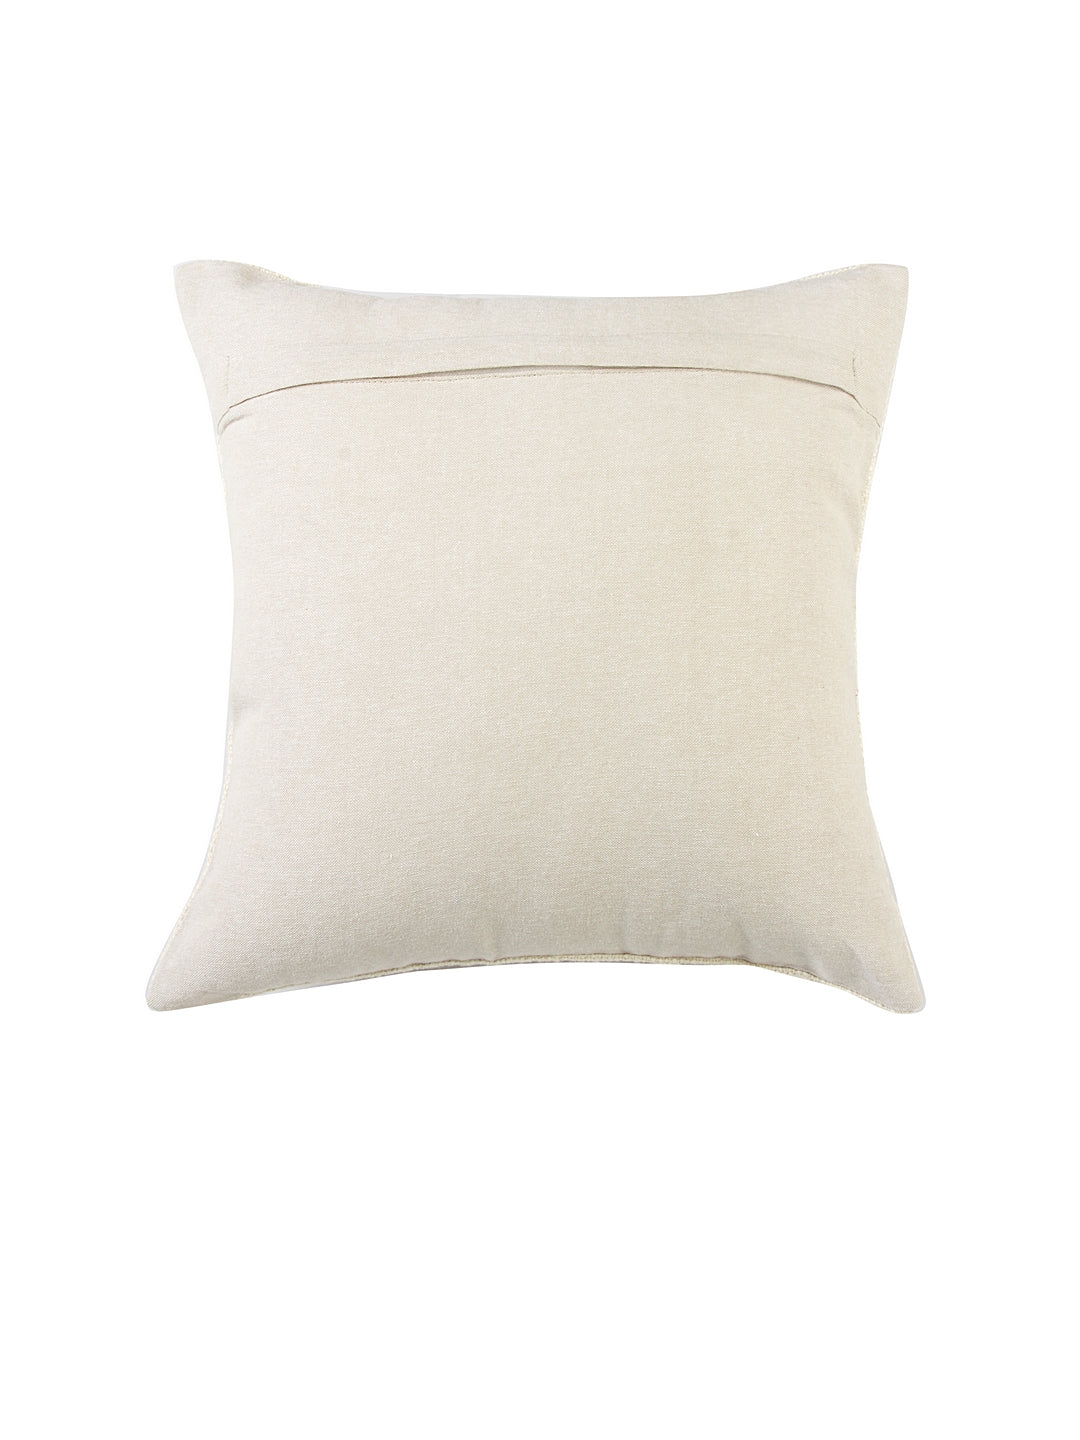 Blanc9 Set of 5 Tufted and Solid 40x40 CM Cushion Covers